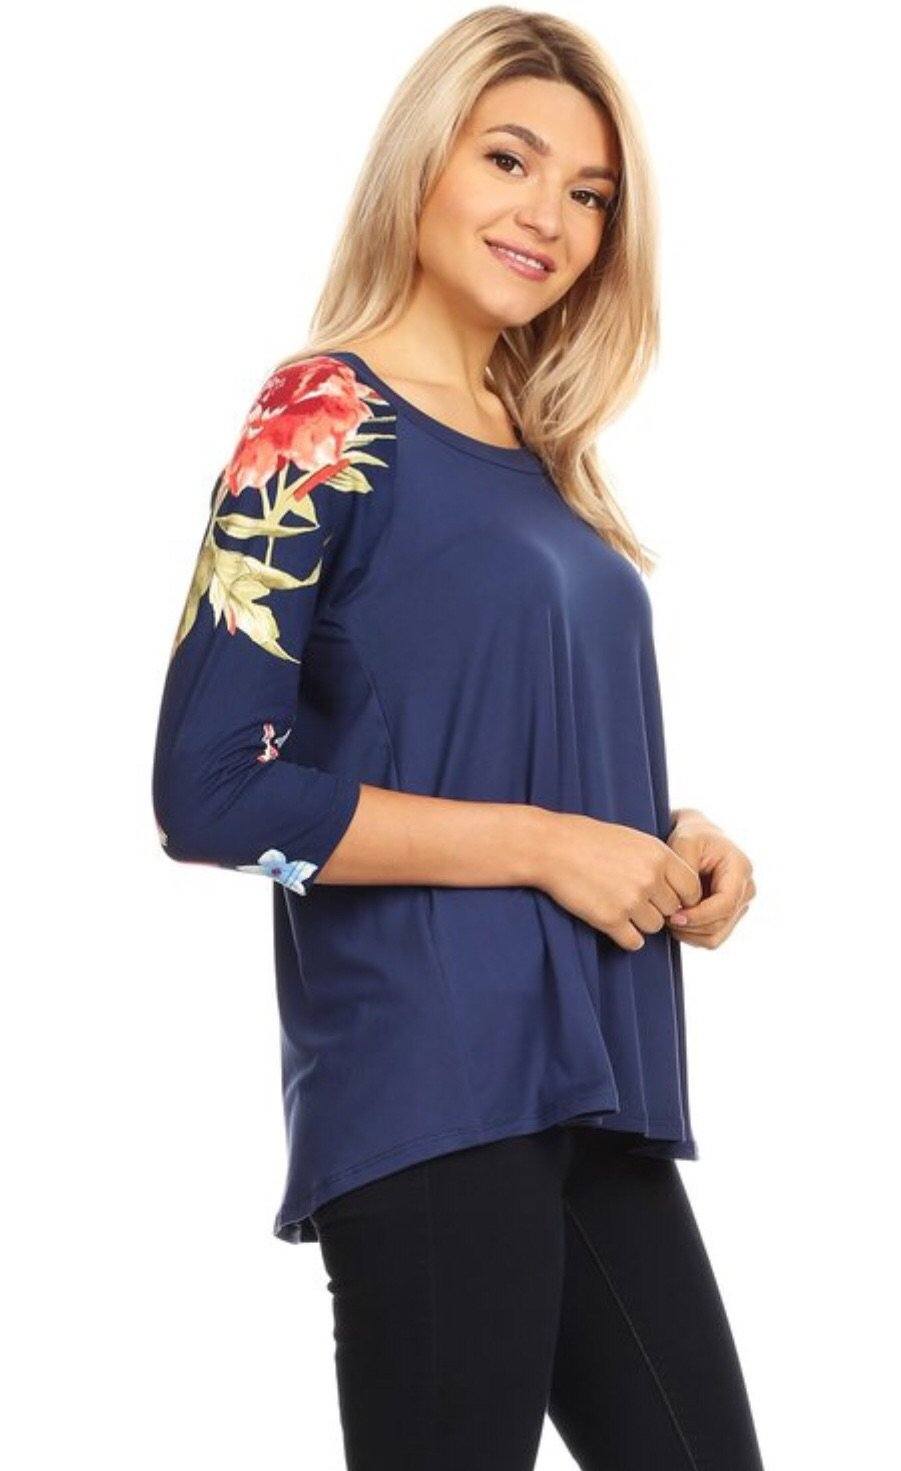 Women's Blue Top 3/4 Sleeve Floral Shirt: S/M/L Tunics MomMe and More 